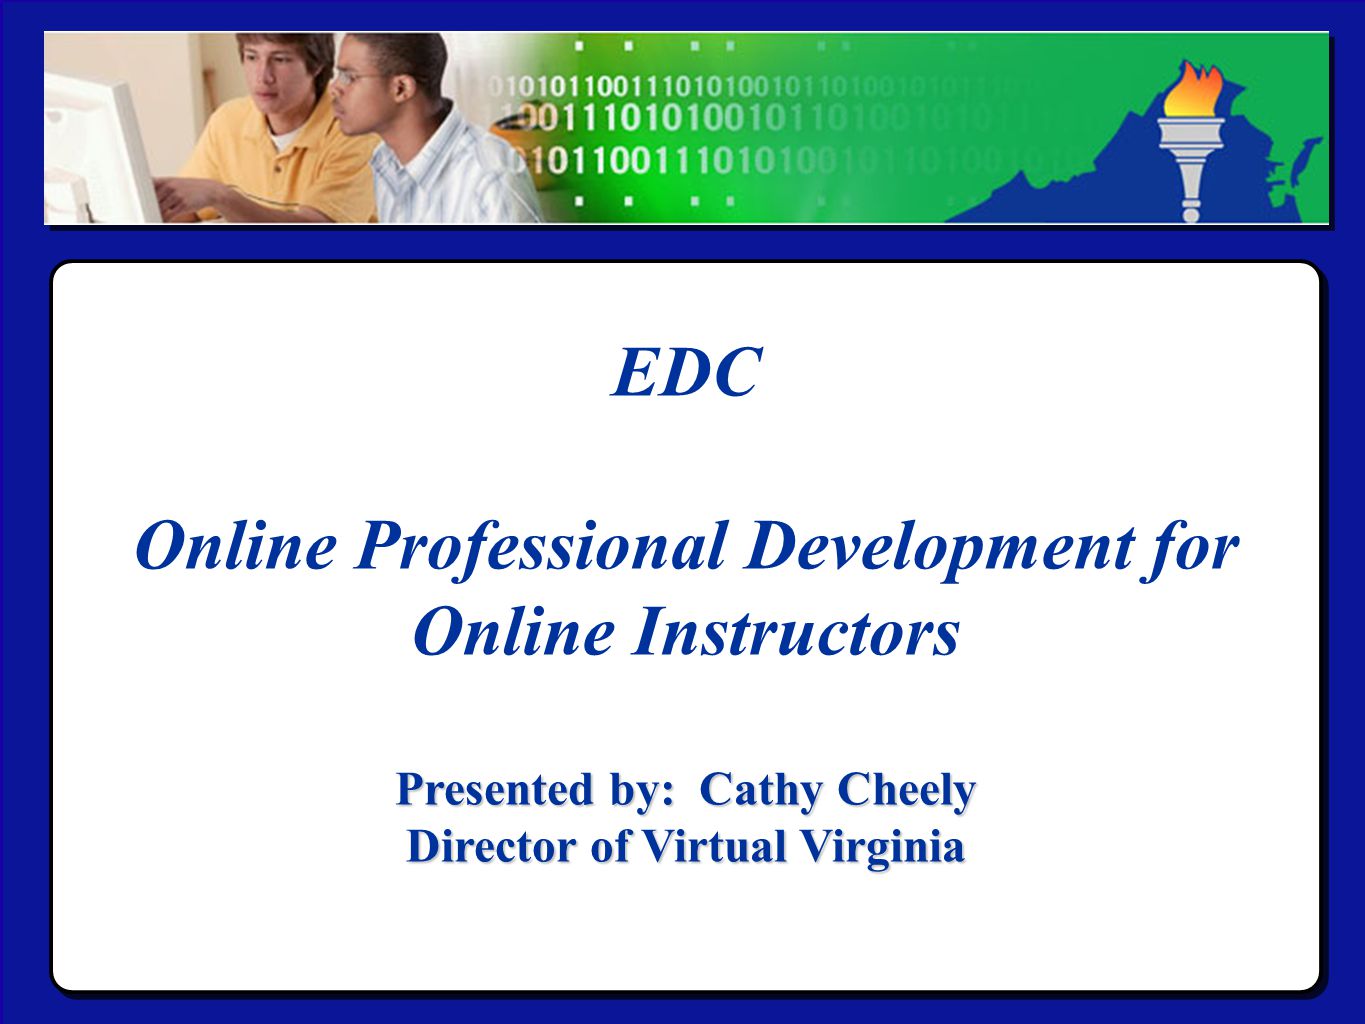 Virtual Virginia EDC Online Professional Development for Online Instructors Presented by: Cathy Cheely Director of Virtual Virginia EDC Online Professional Development for Online Instructors Presented by: Cathy Cheely Director of Virtual Virginia